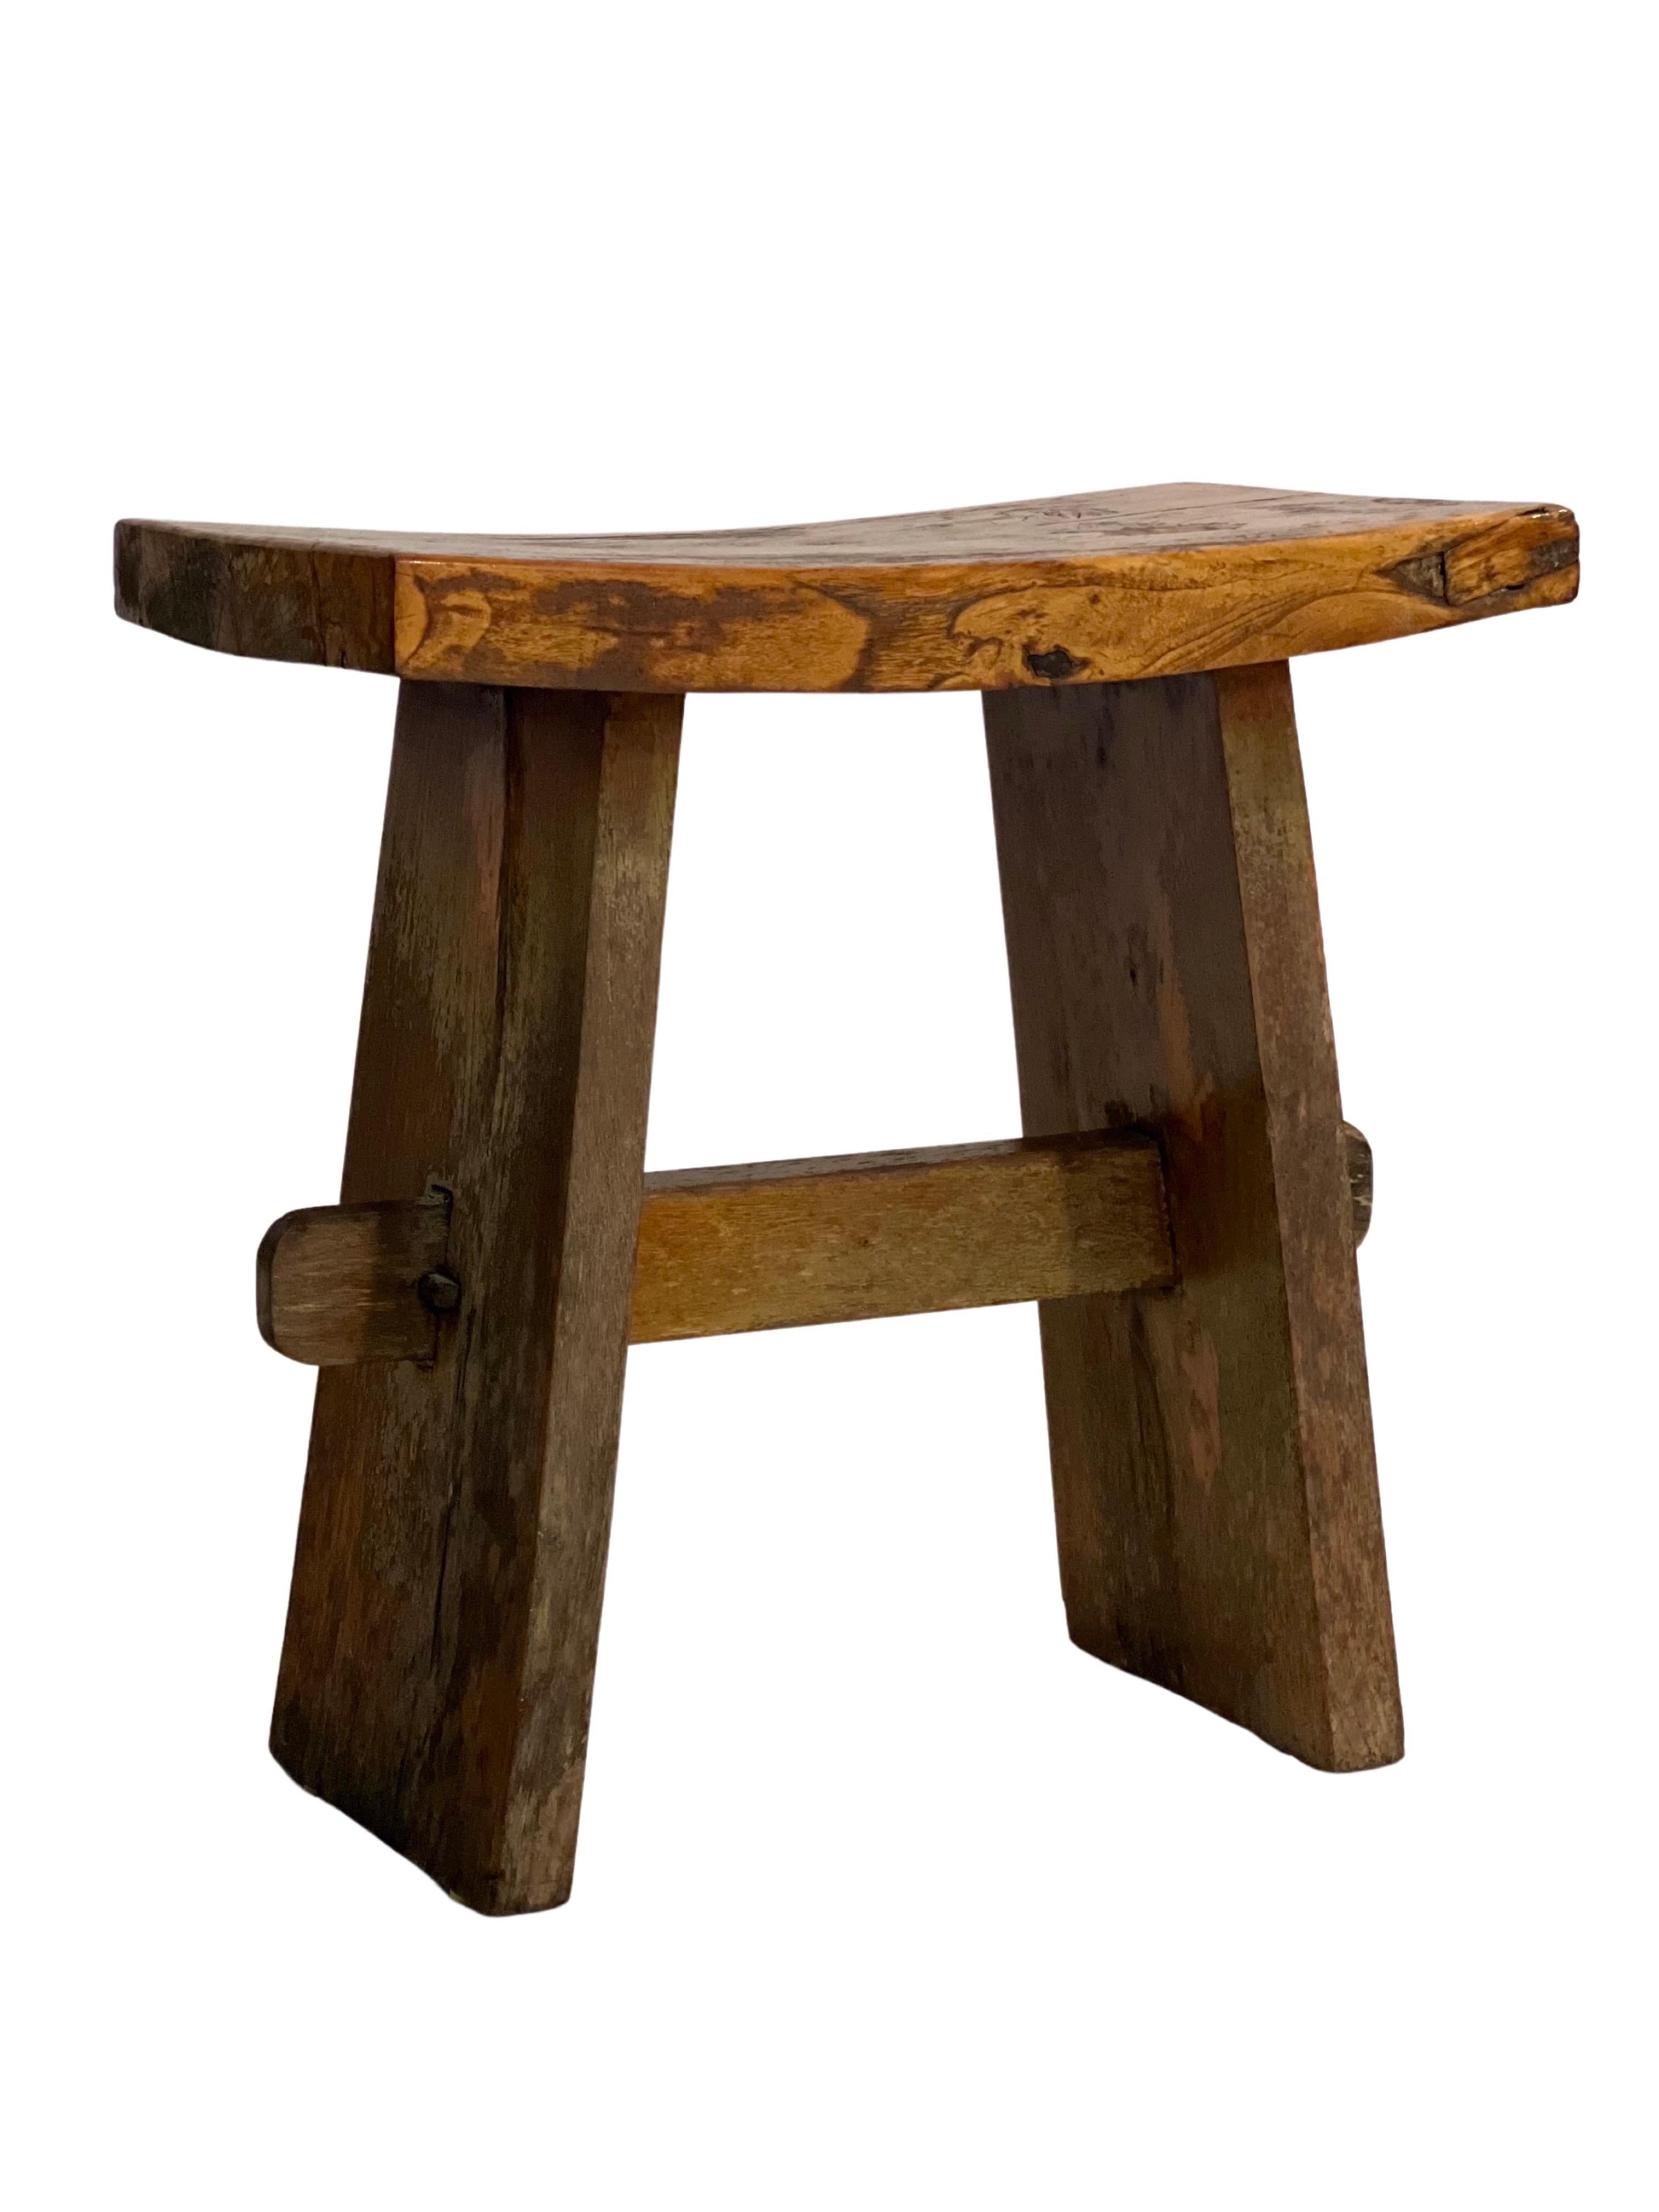 Vintage reclaimed teak rustic zen temple or garden stool, China, circa 1940's.

This adorable stool is crafted of heavy reclaimed teak from a fishing boat. It features original Chinese wood peg construction and has a great time-worn patina. The